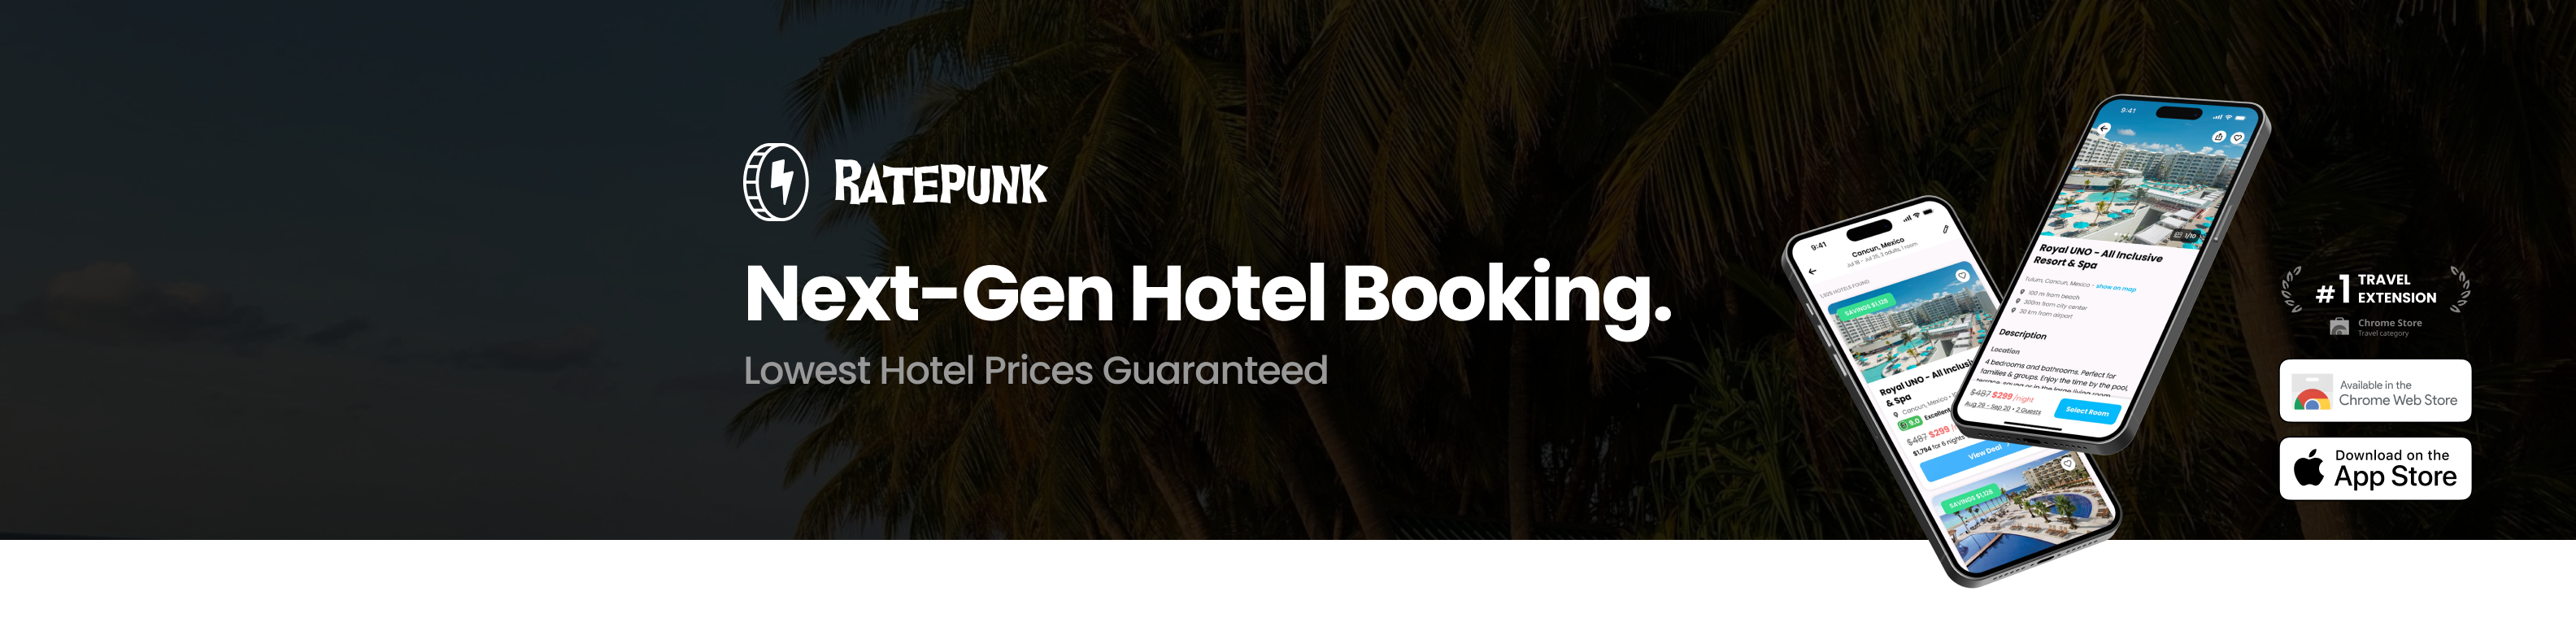 Next Gen Hotel Booking- lowest hotel prices guaranteed. book hotels with ratepunk